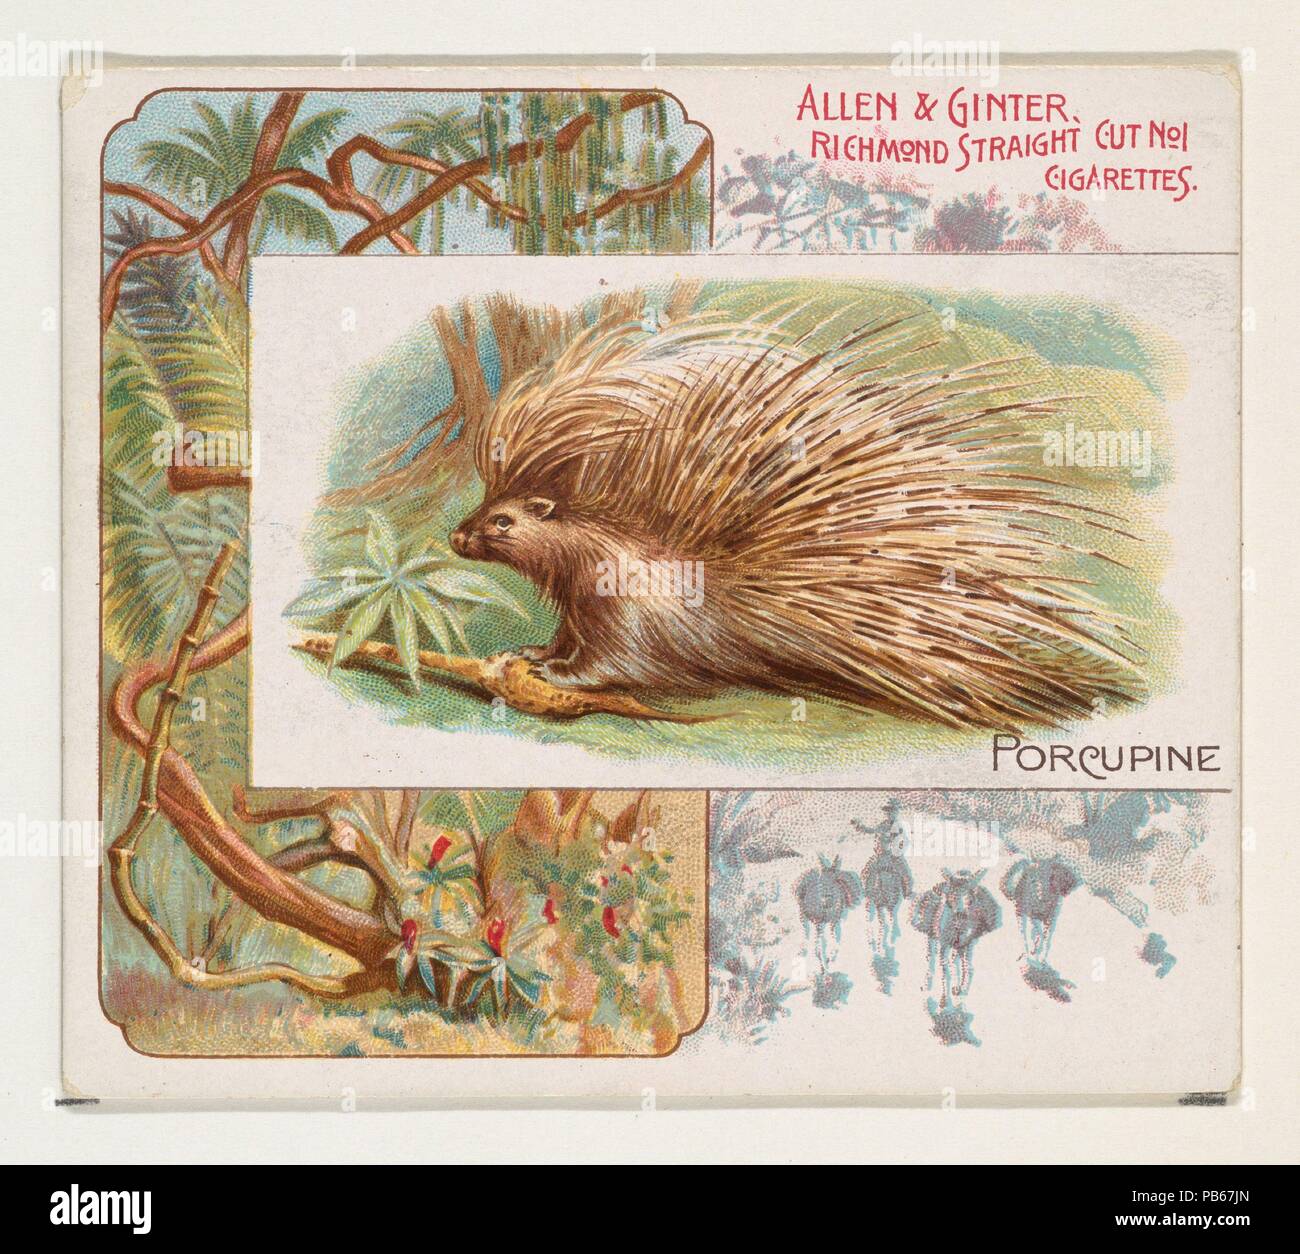 Porcupine, from Quadrupeds series (N41) for Allen & Ginter Cigarettes. Dimensions: Sheet: 2 7/8 x 3 1/4 in. (7.3 x 8.3 cm). Lithographer: Lithography by Lindner, Eddy & Claus (American, New York). Publisher: Issued by Allen & Ginter (American, Richmond, Virginia). Date: 1890.  Large trade cards from the 'Quadrupeds' series (N41), issued in 1890 in a set of 50 cards to promote Allen & Ginter brand cigarettes. Series N41 reproduces the cards from N21 in a larger size. Museum: Metropolitan Museum of Art, New York, USA. Stock Photo